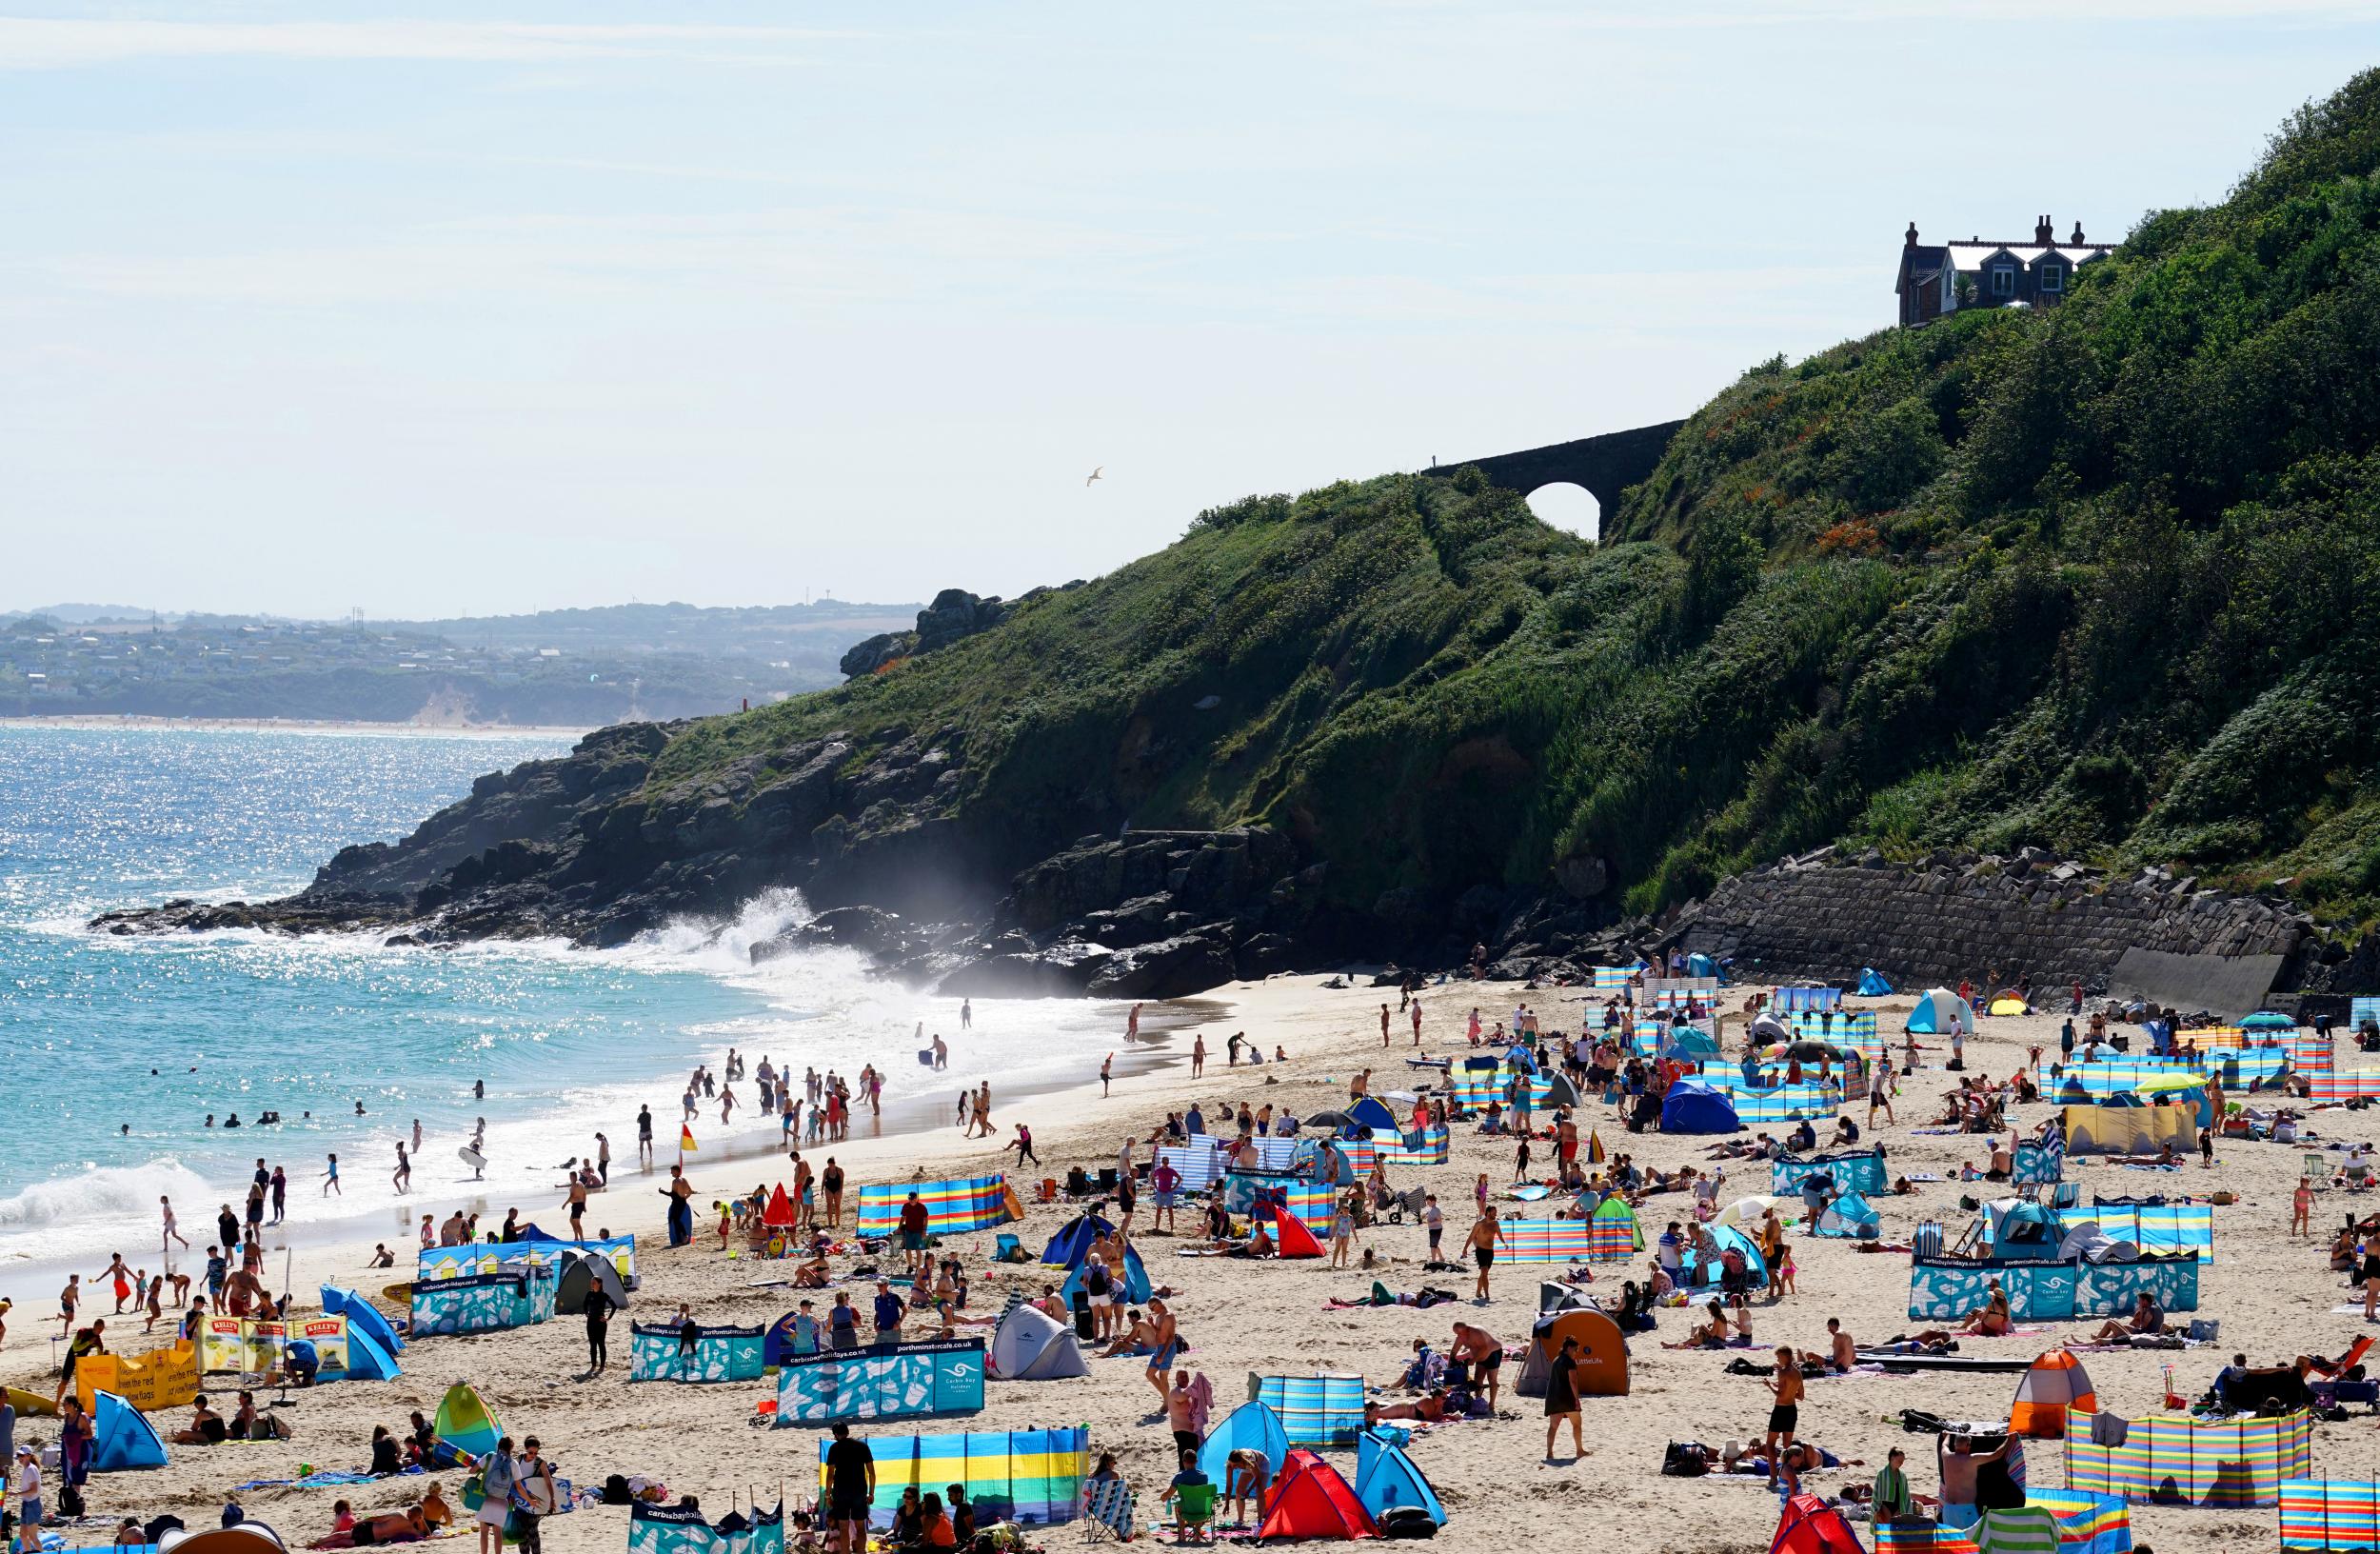 Groups of people relax on the beach in the sun on August 9, 2020 in St Ives, Cornwall, England